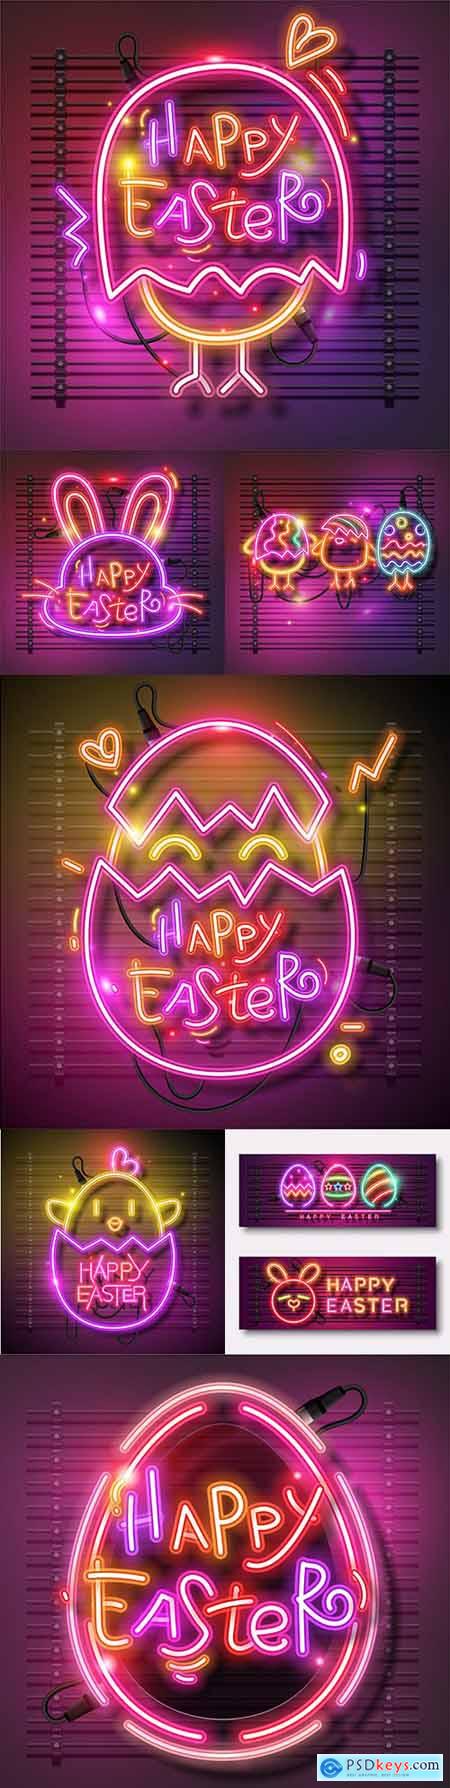 Happy Easter design banner with neon eggs illustration